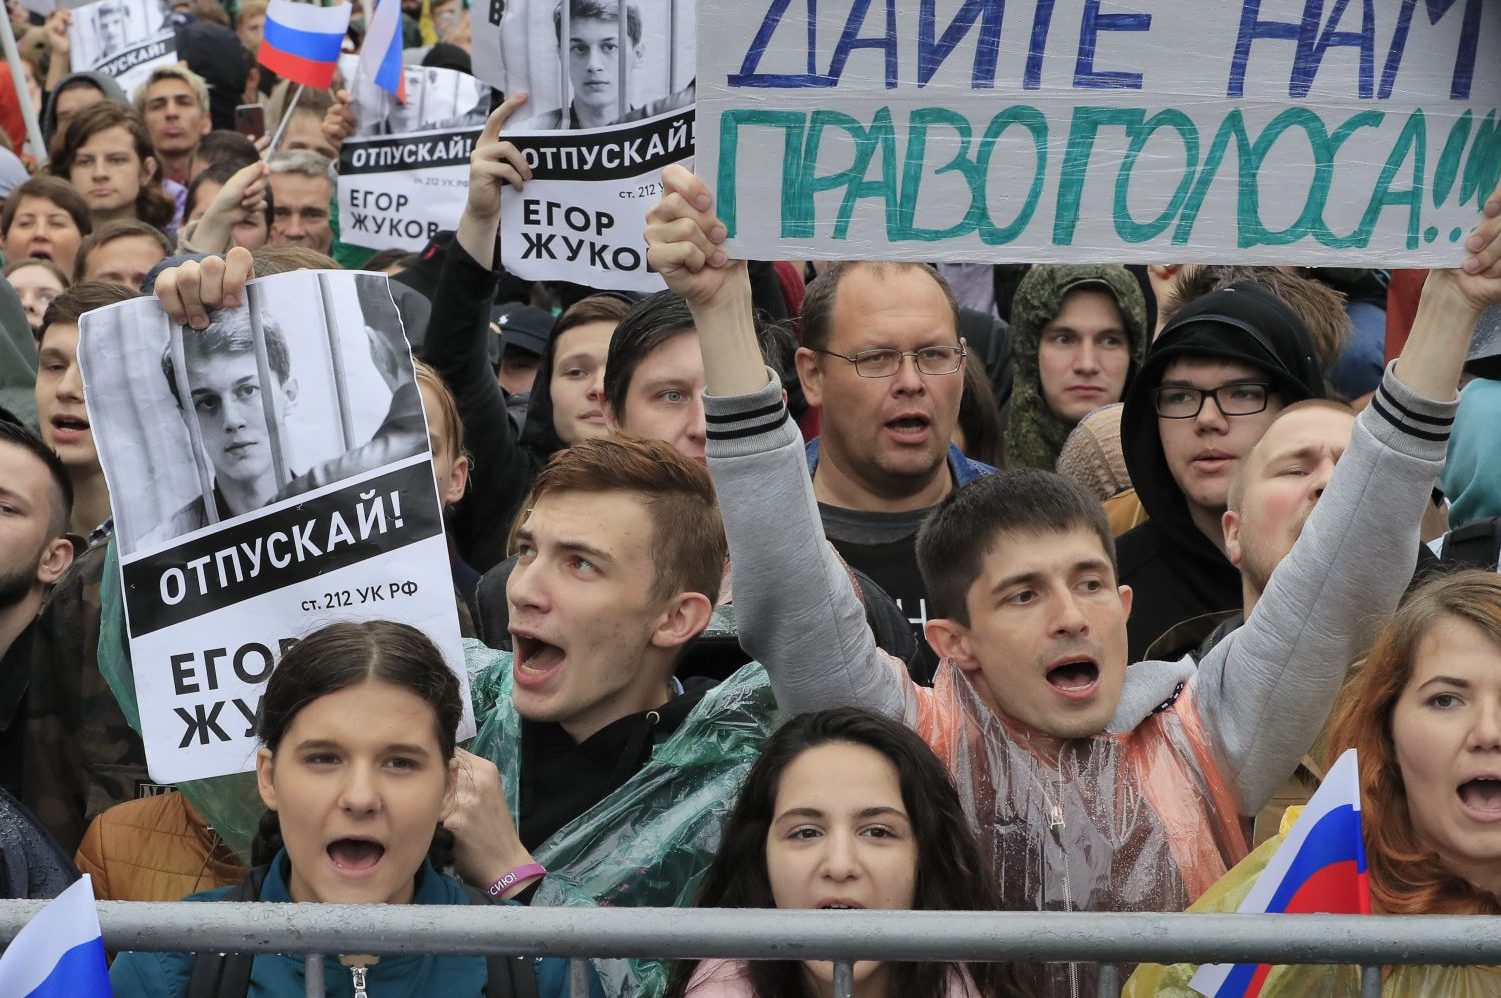 Putin’s Russia is stagnating but there will be no “Moscow Maidan”